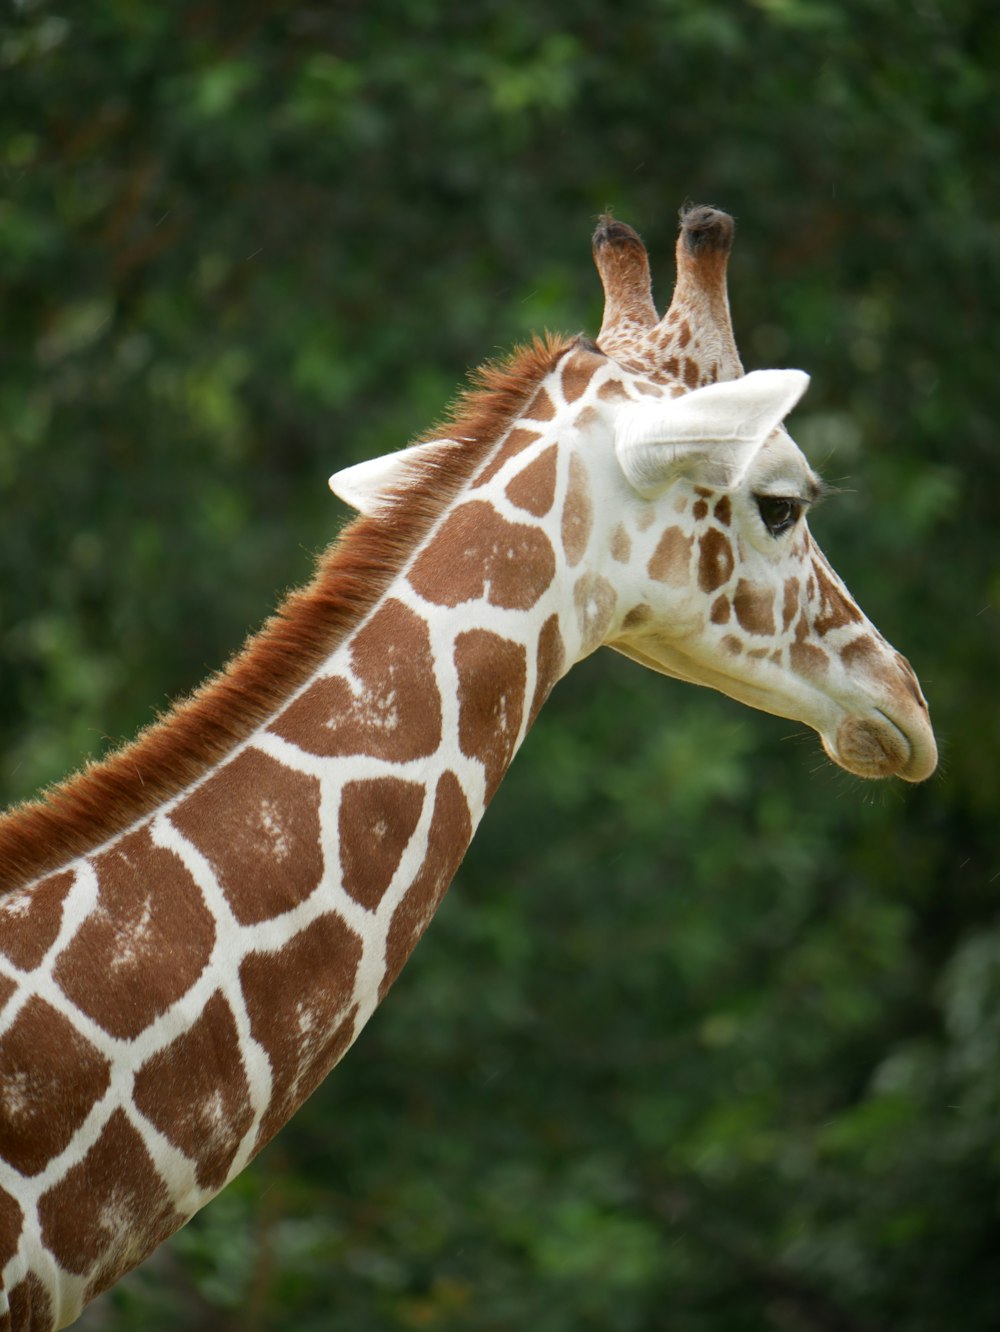 a giraffe standing next to a forest filled with trees